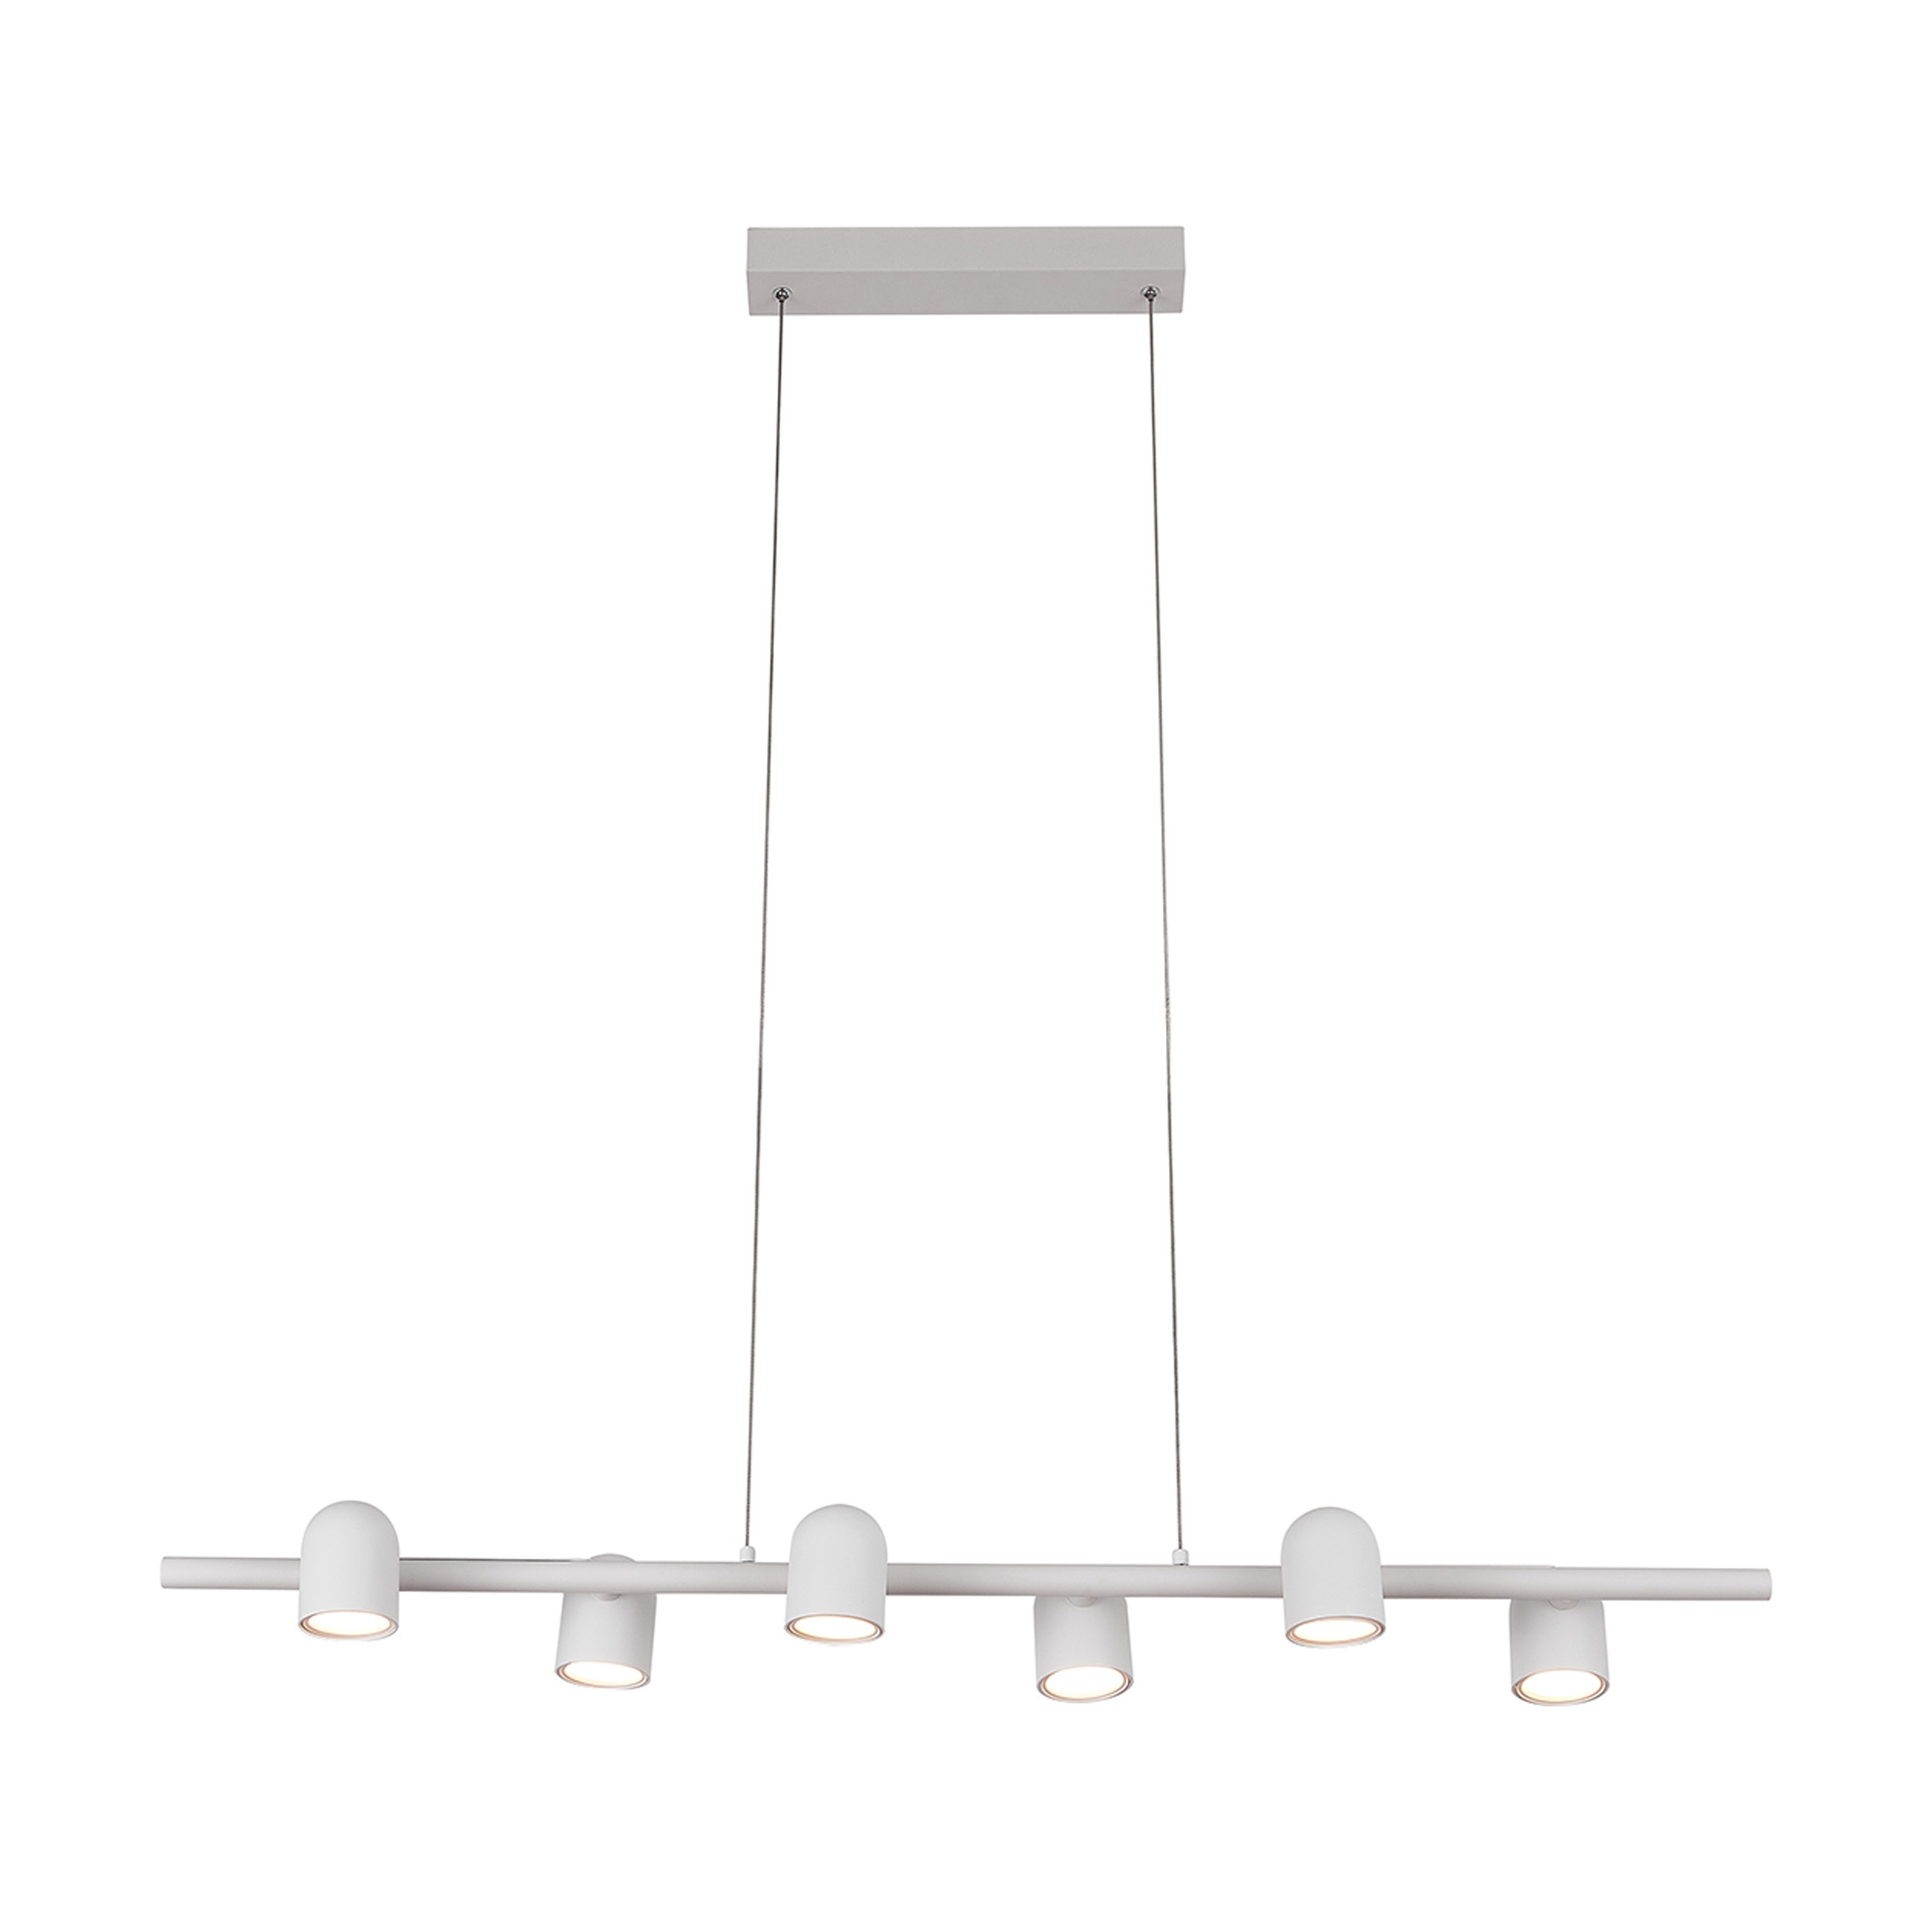 IOS Ceiling Lights Mantra Fusion Linear Fittings